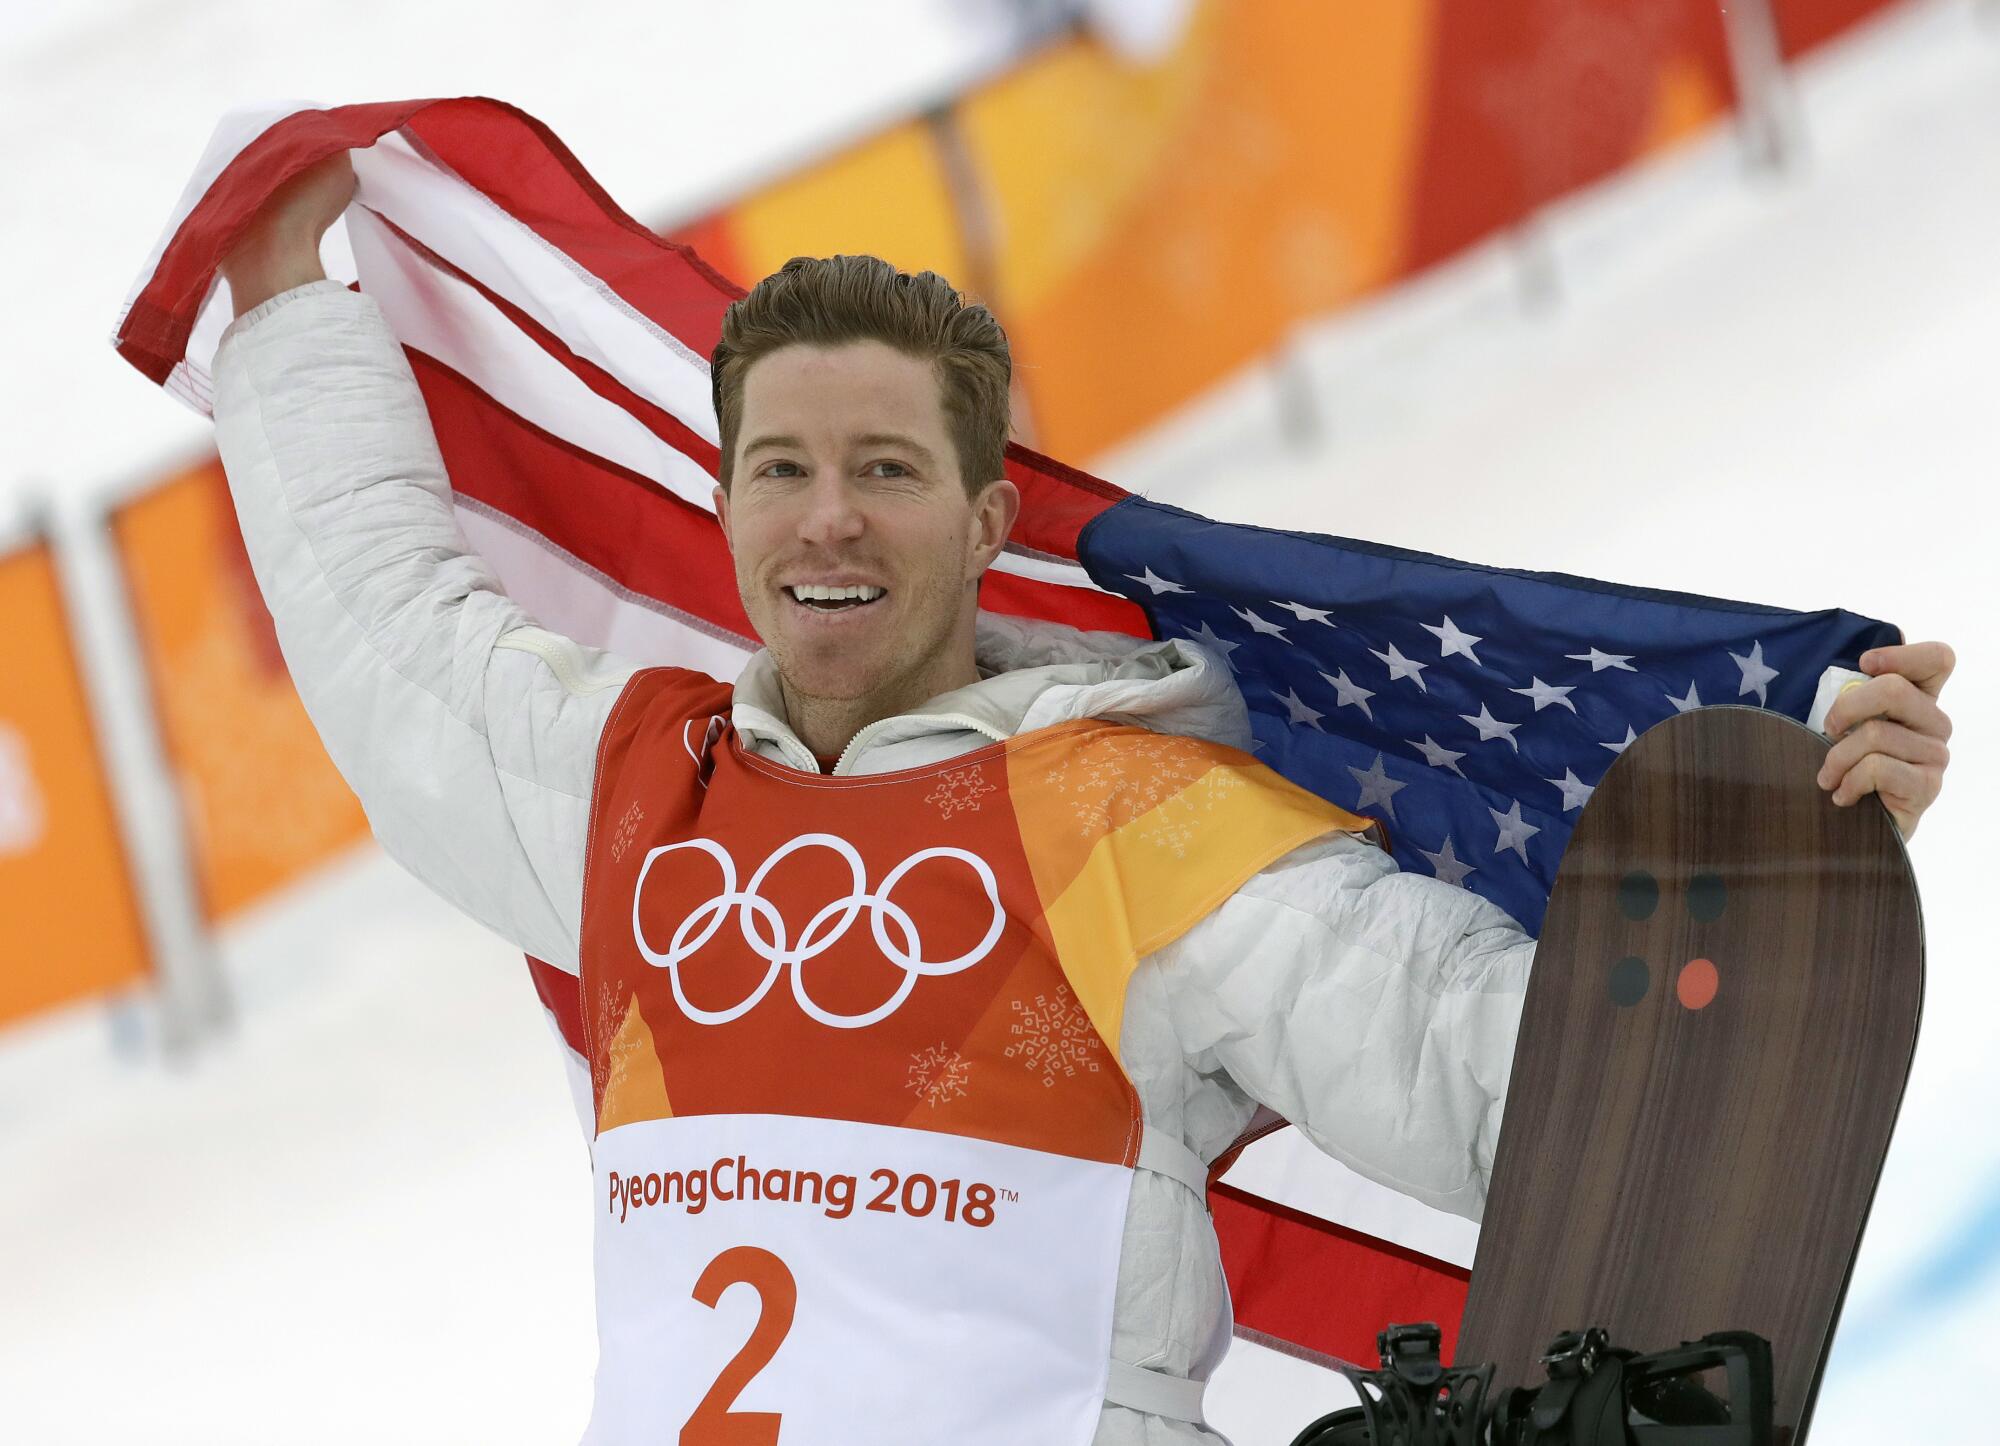 Shaun White: 'I've decided this will be my last Olympics,' says US